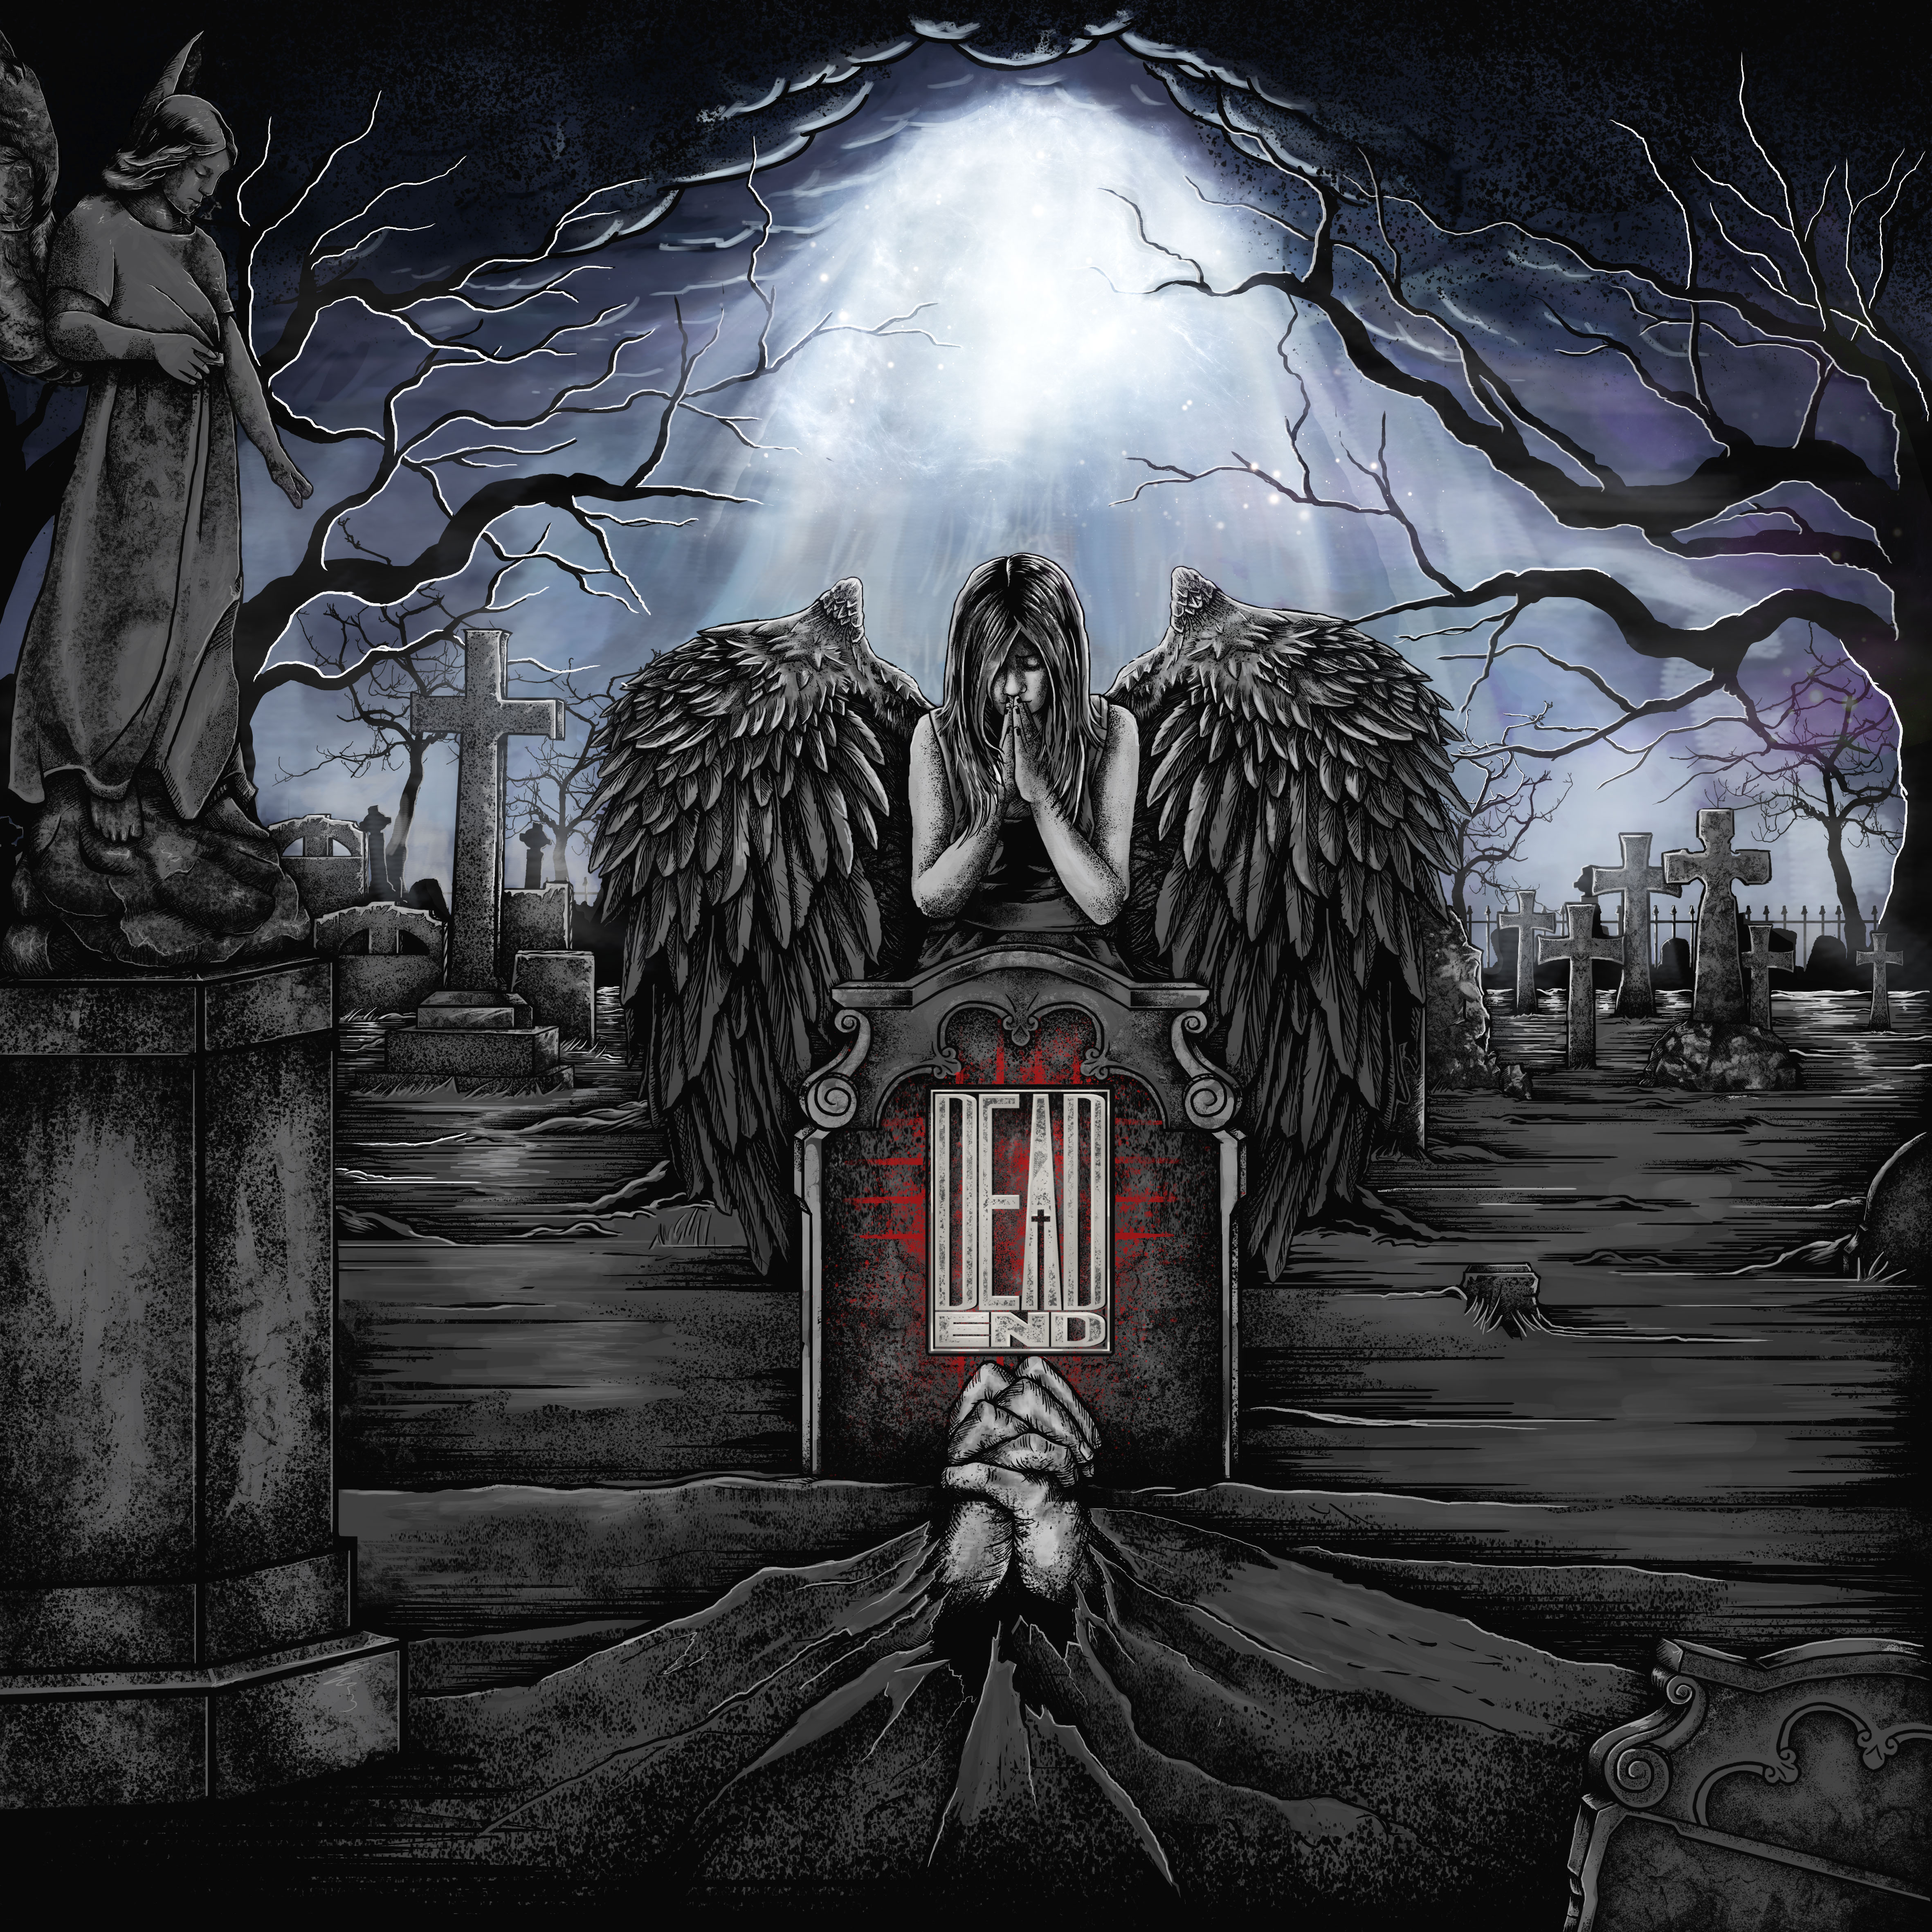 Dead End – Reborn from the Ancient Grave